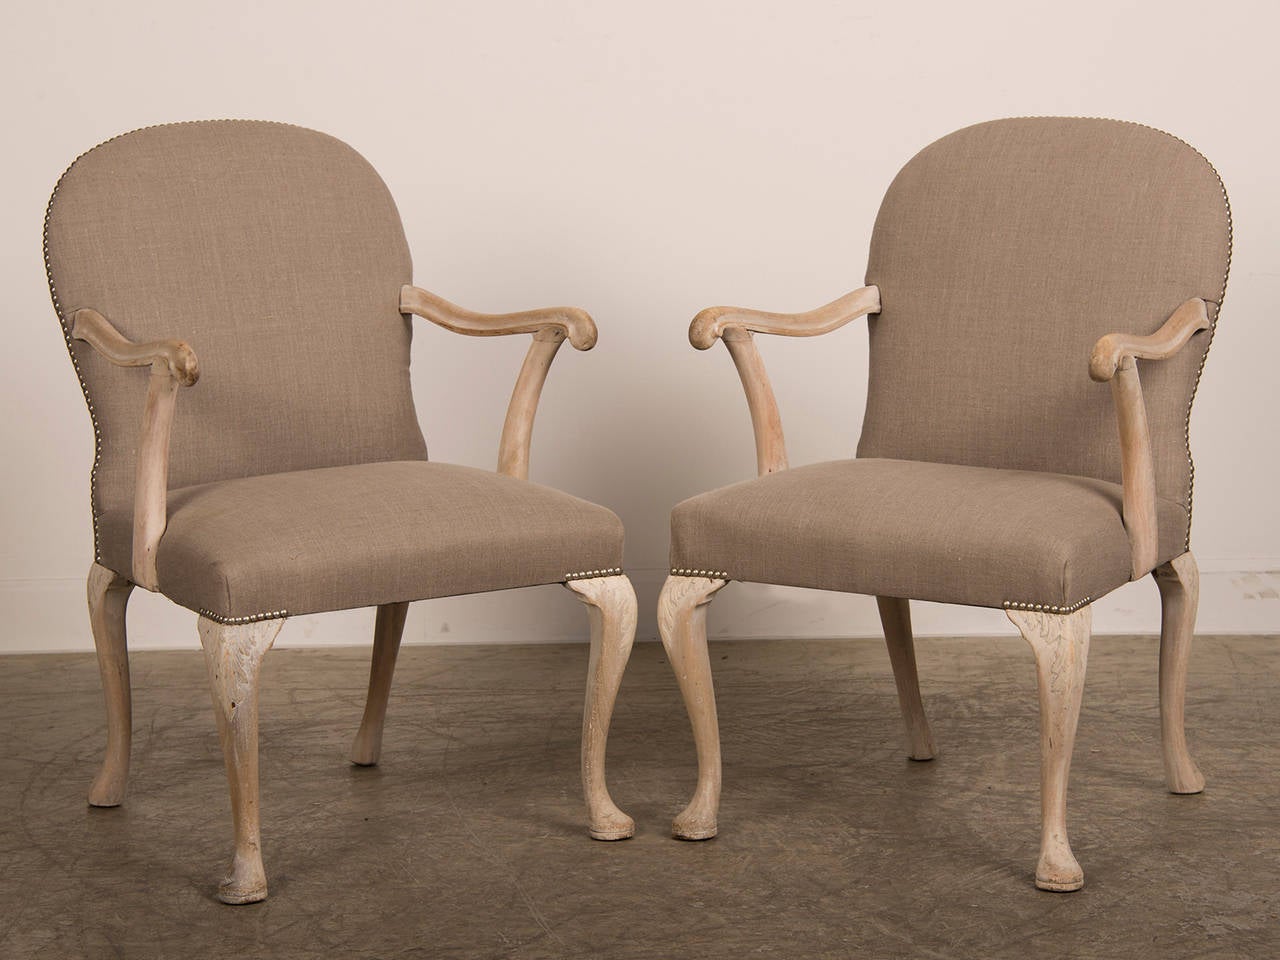 William Kent Style Pair Carved Armchairs, England c.1890.